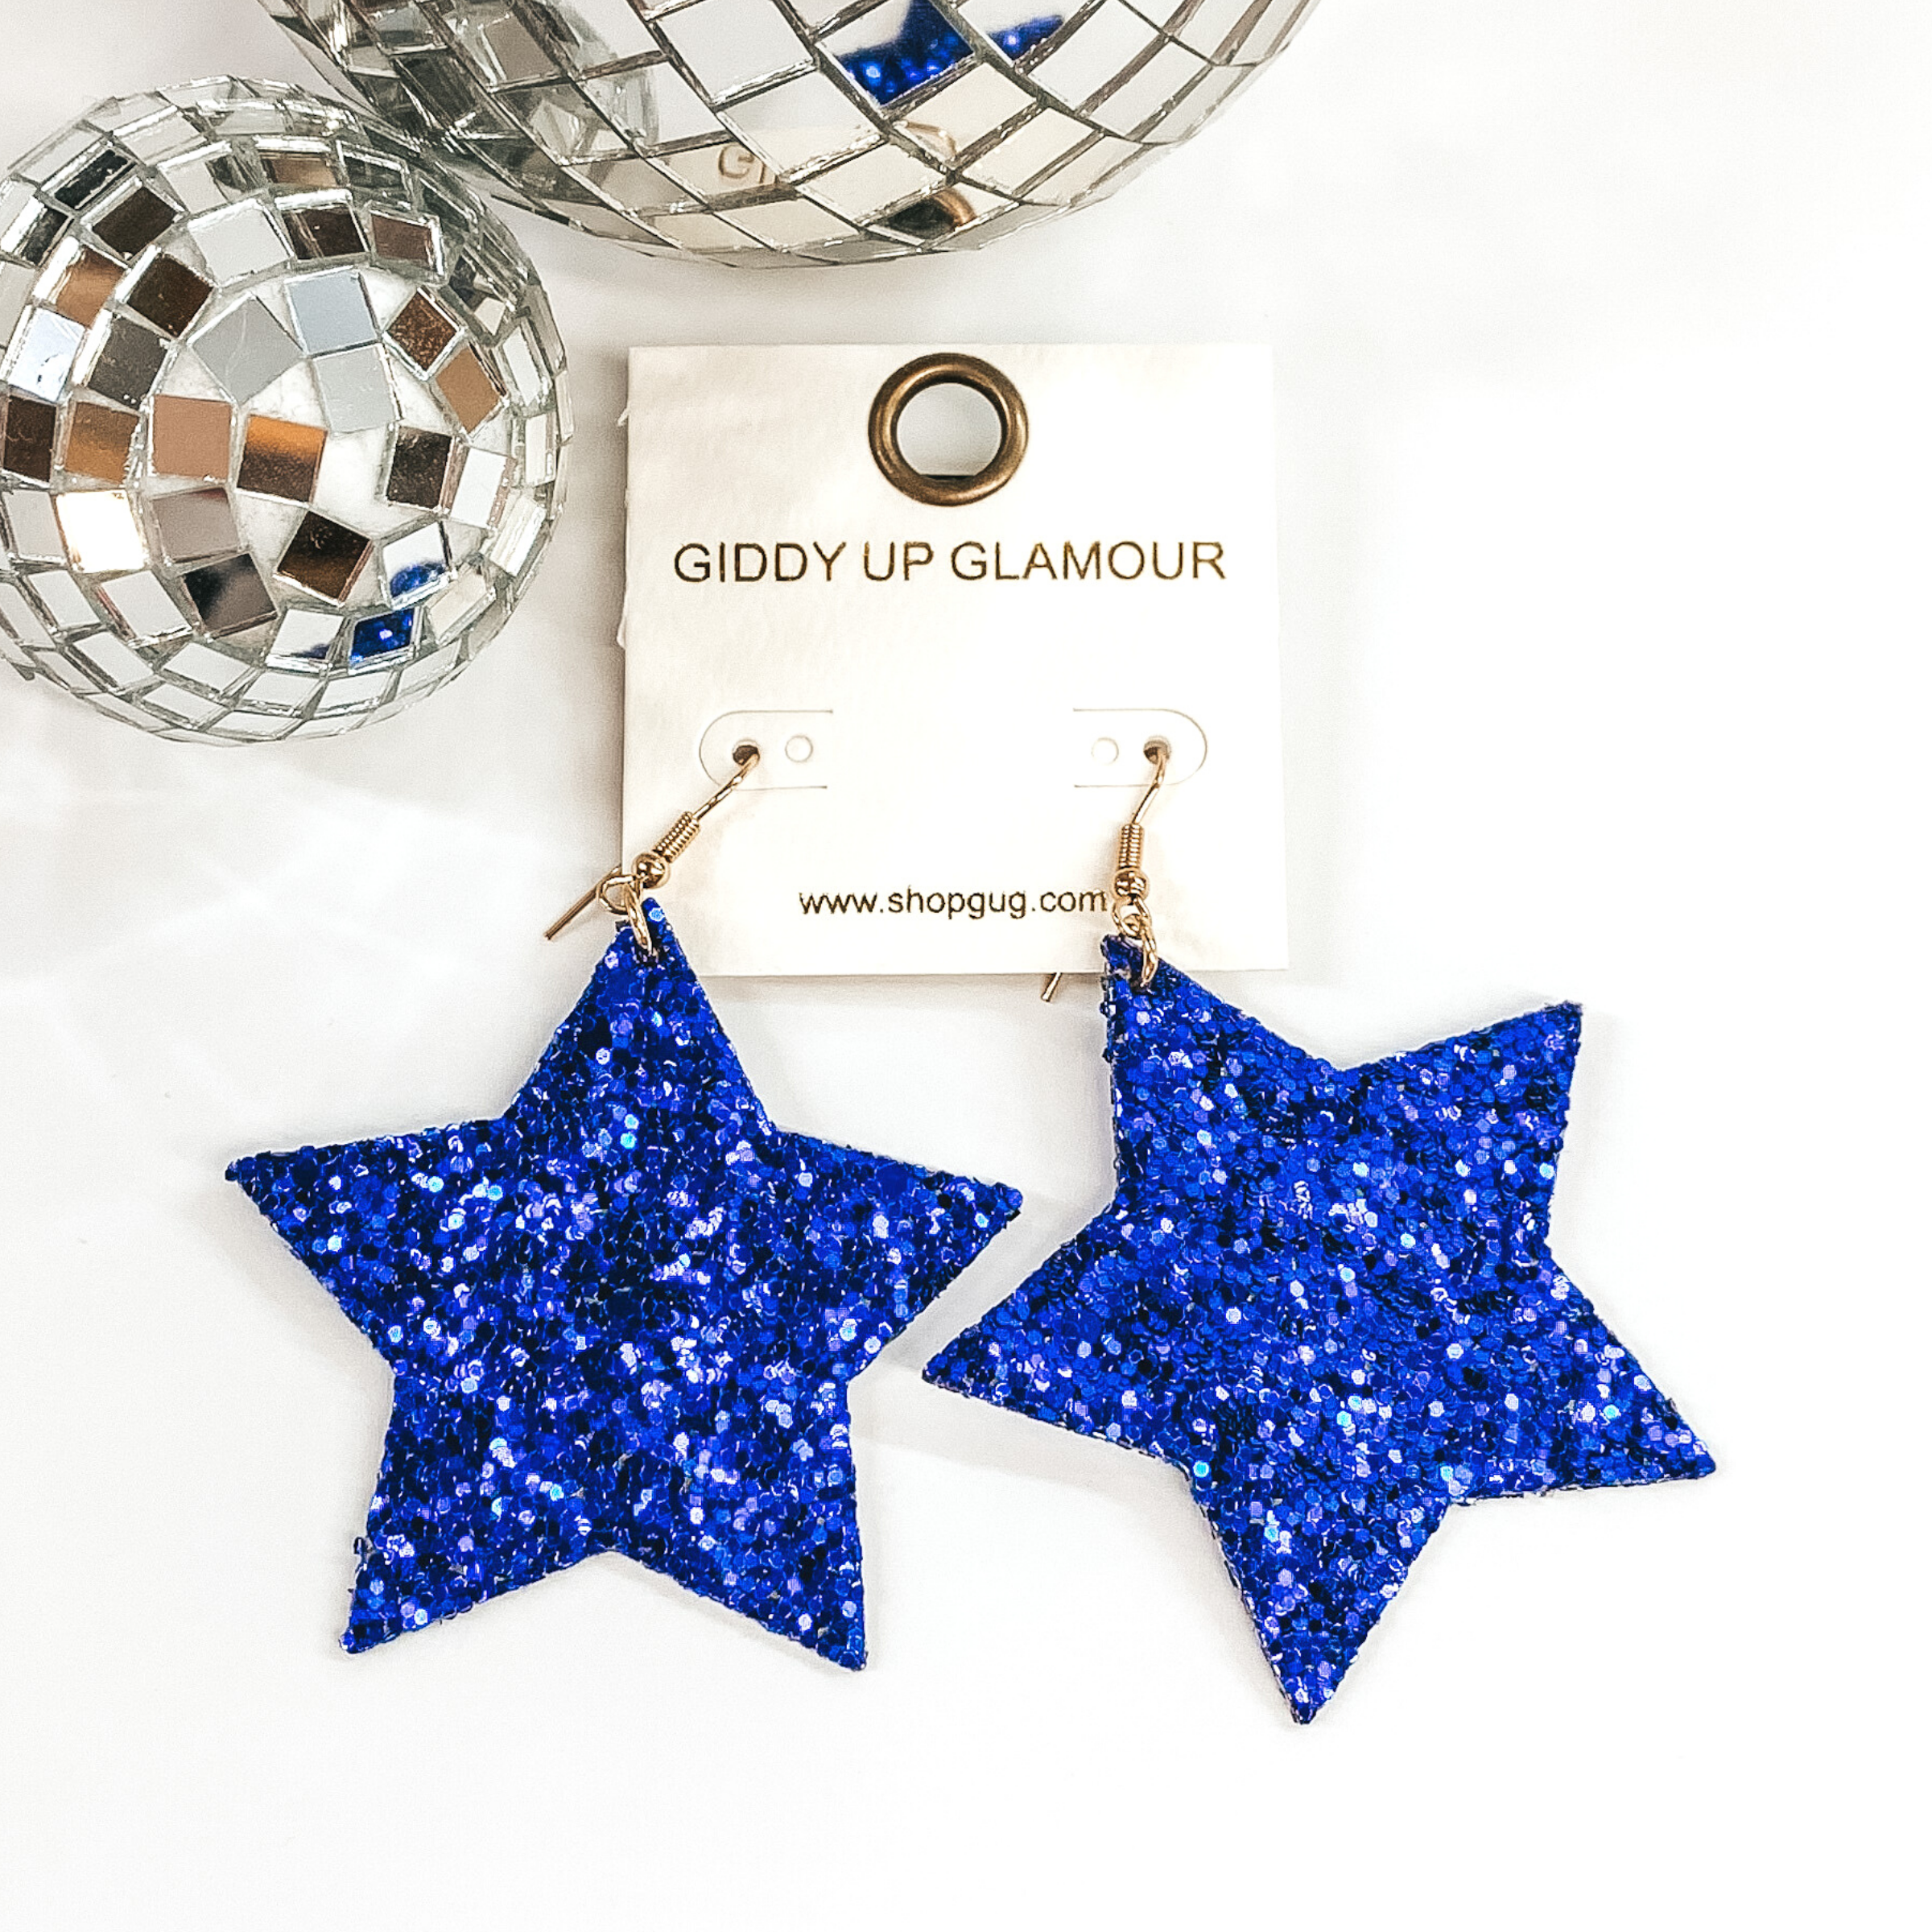 Glitter star dangle earrings in blue with a gold earrings hook. These earrings are pictured on a white background with a disco ball at the top of the picture.